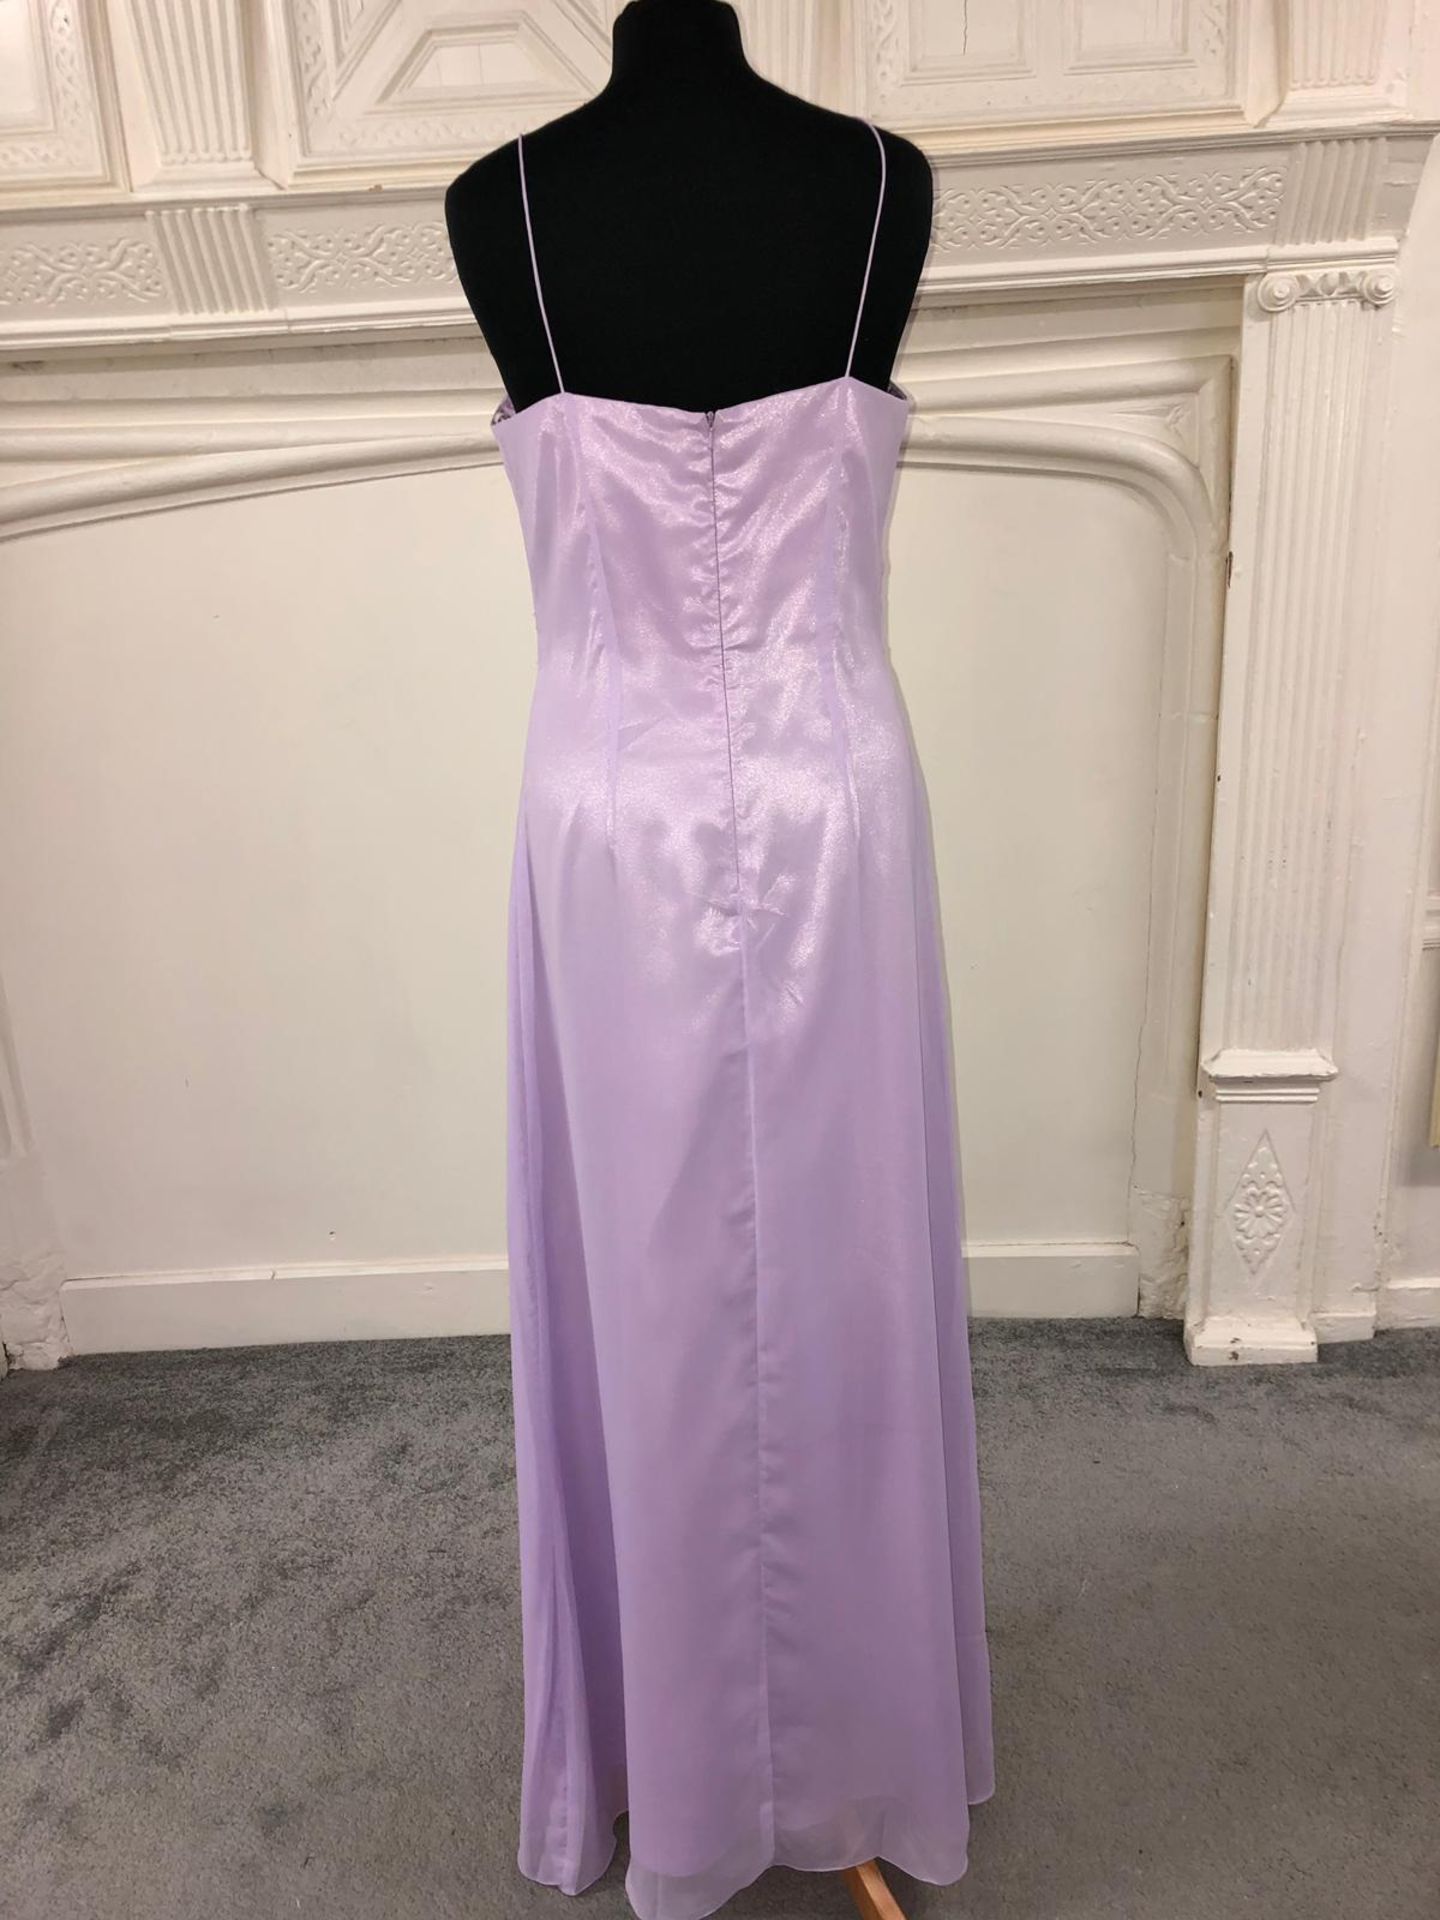 Milano Formals, Bulk Box of Dresses, Mainly Lilac Mixed Sizes - Image 4 of 4